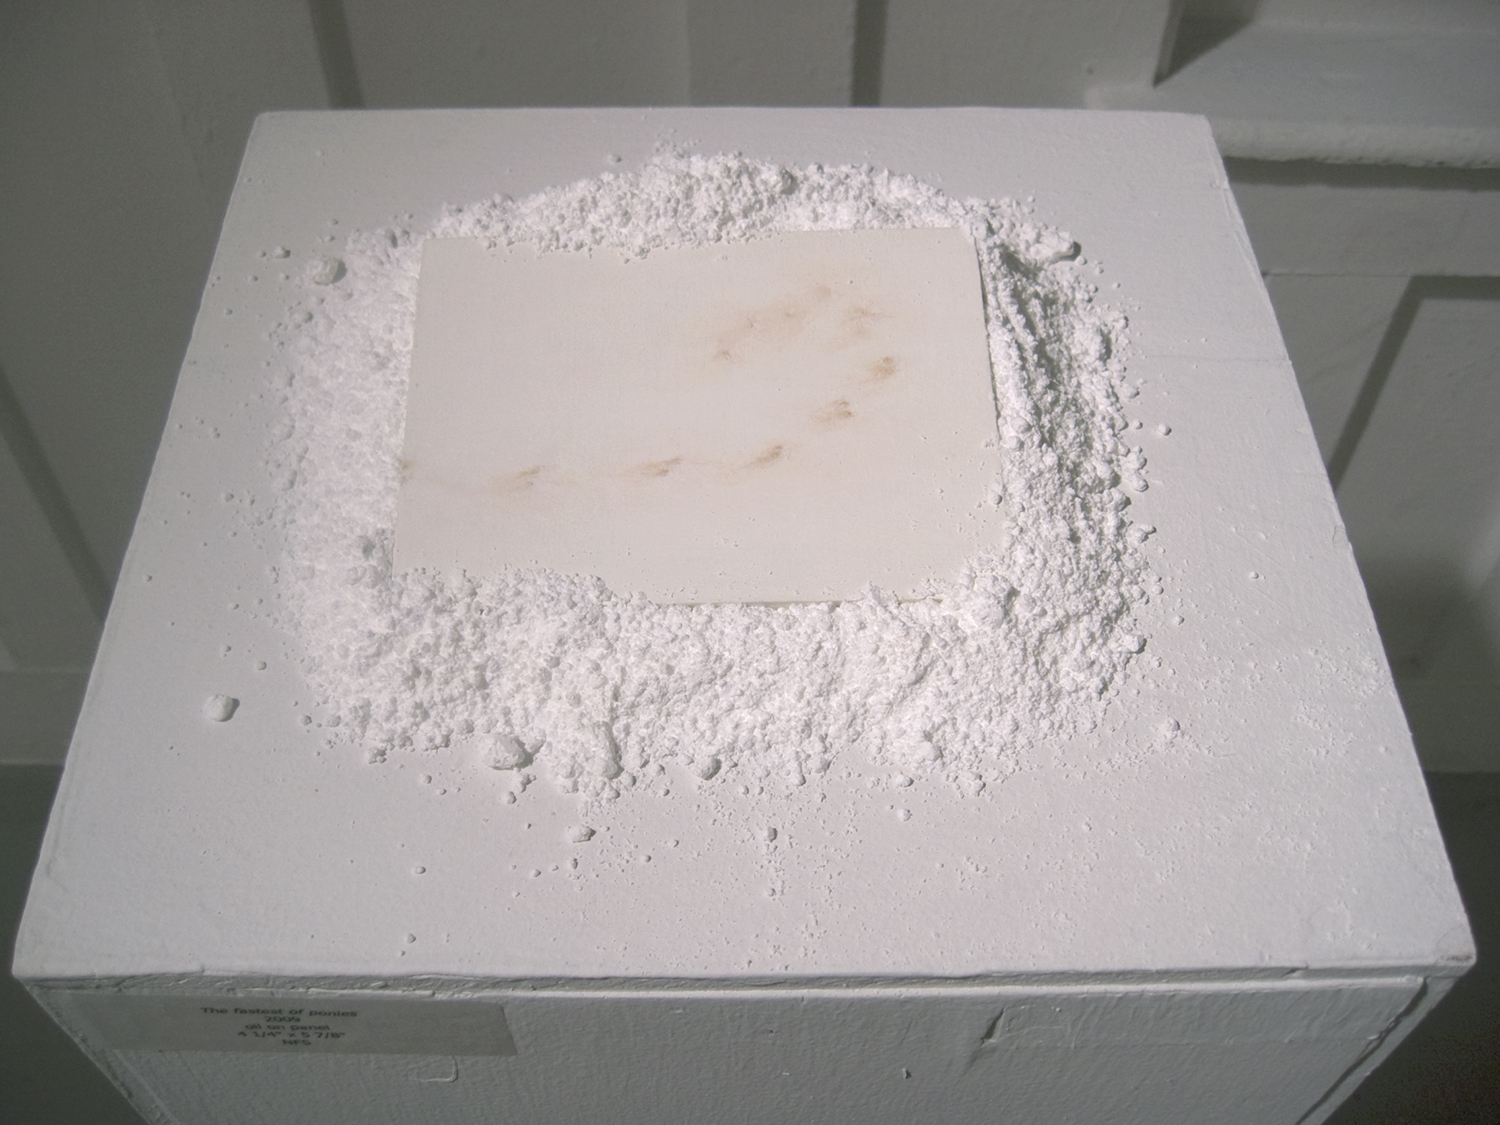    The fastest of ponies  (installed),   2009,     powdered sugar, oil on panel, 7 1/4 x 9 in.  